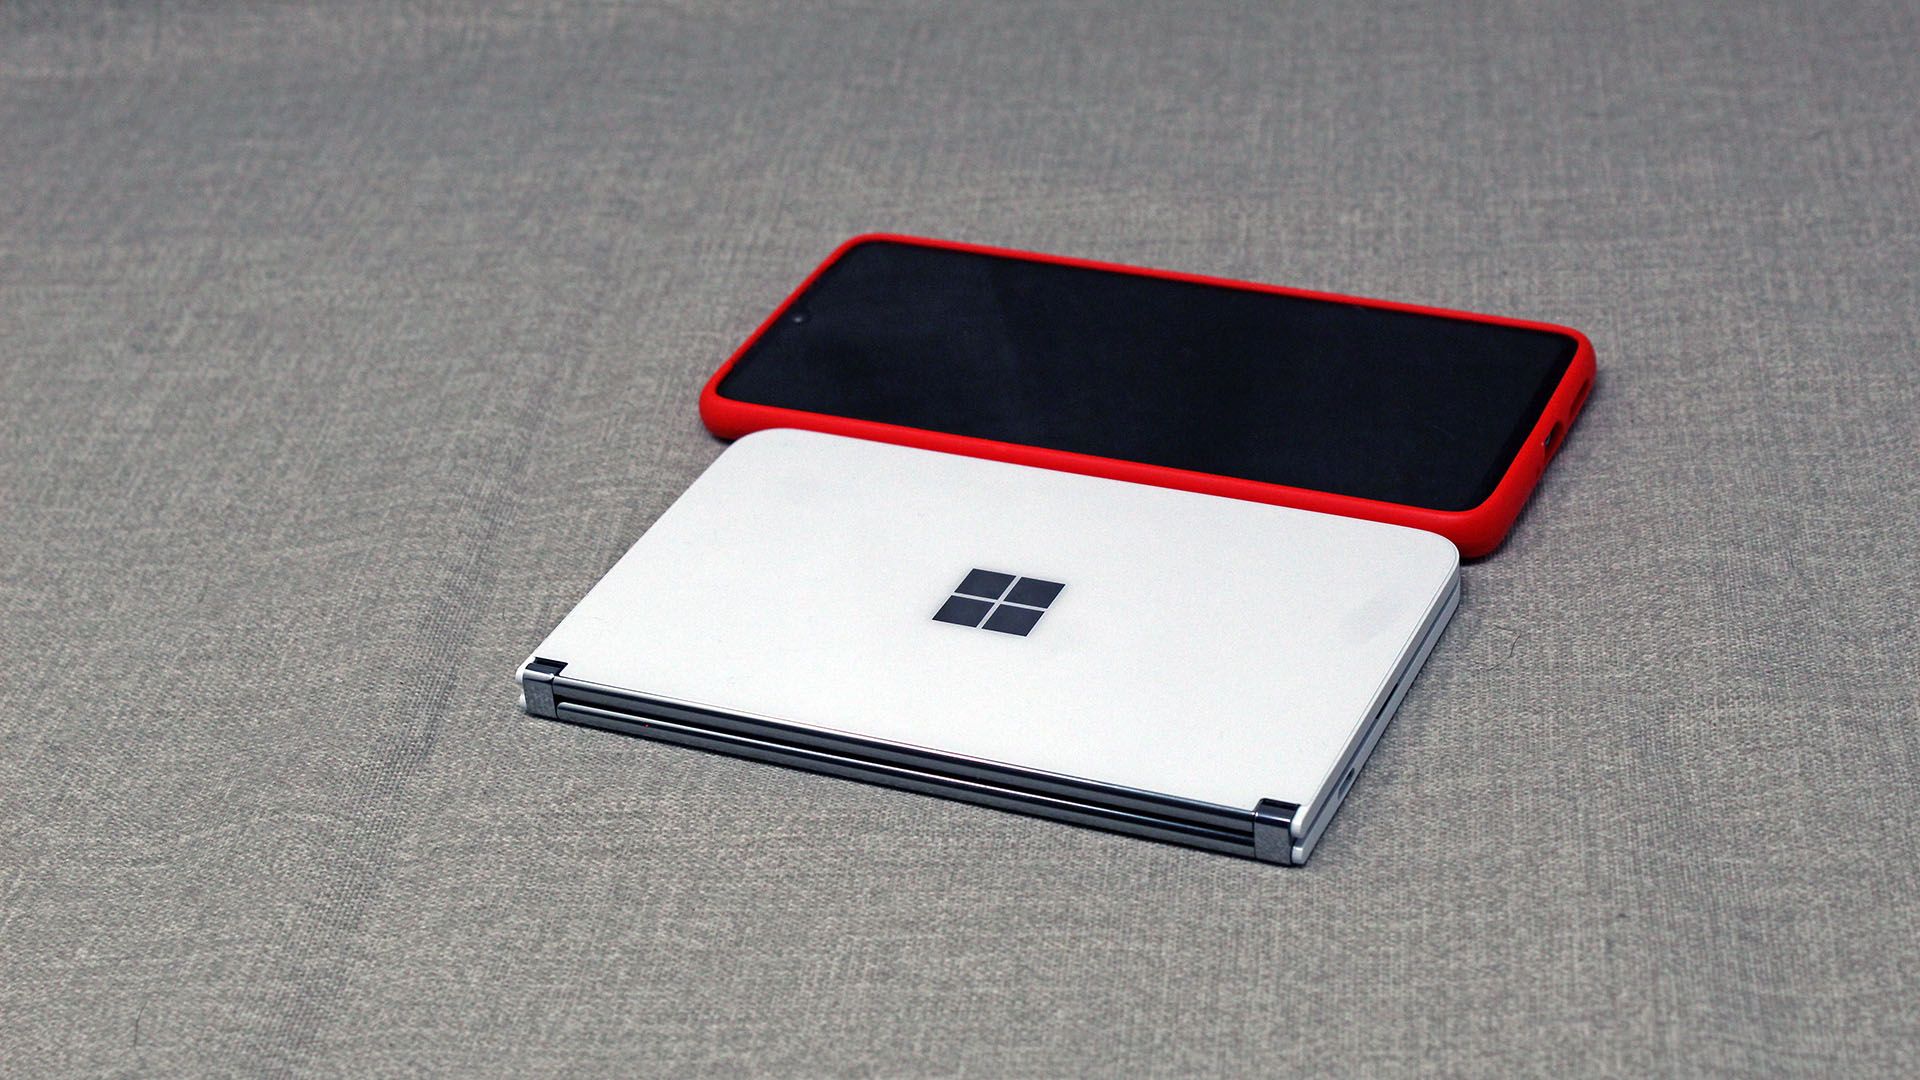 A Surface Duo next to a phone in a case, each about the same width.